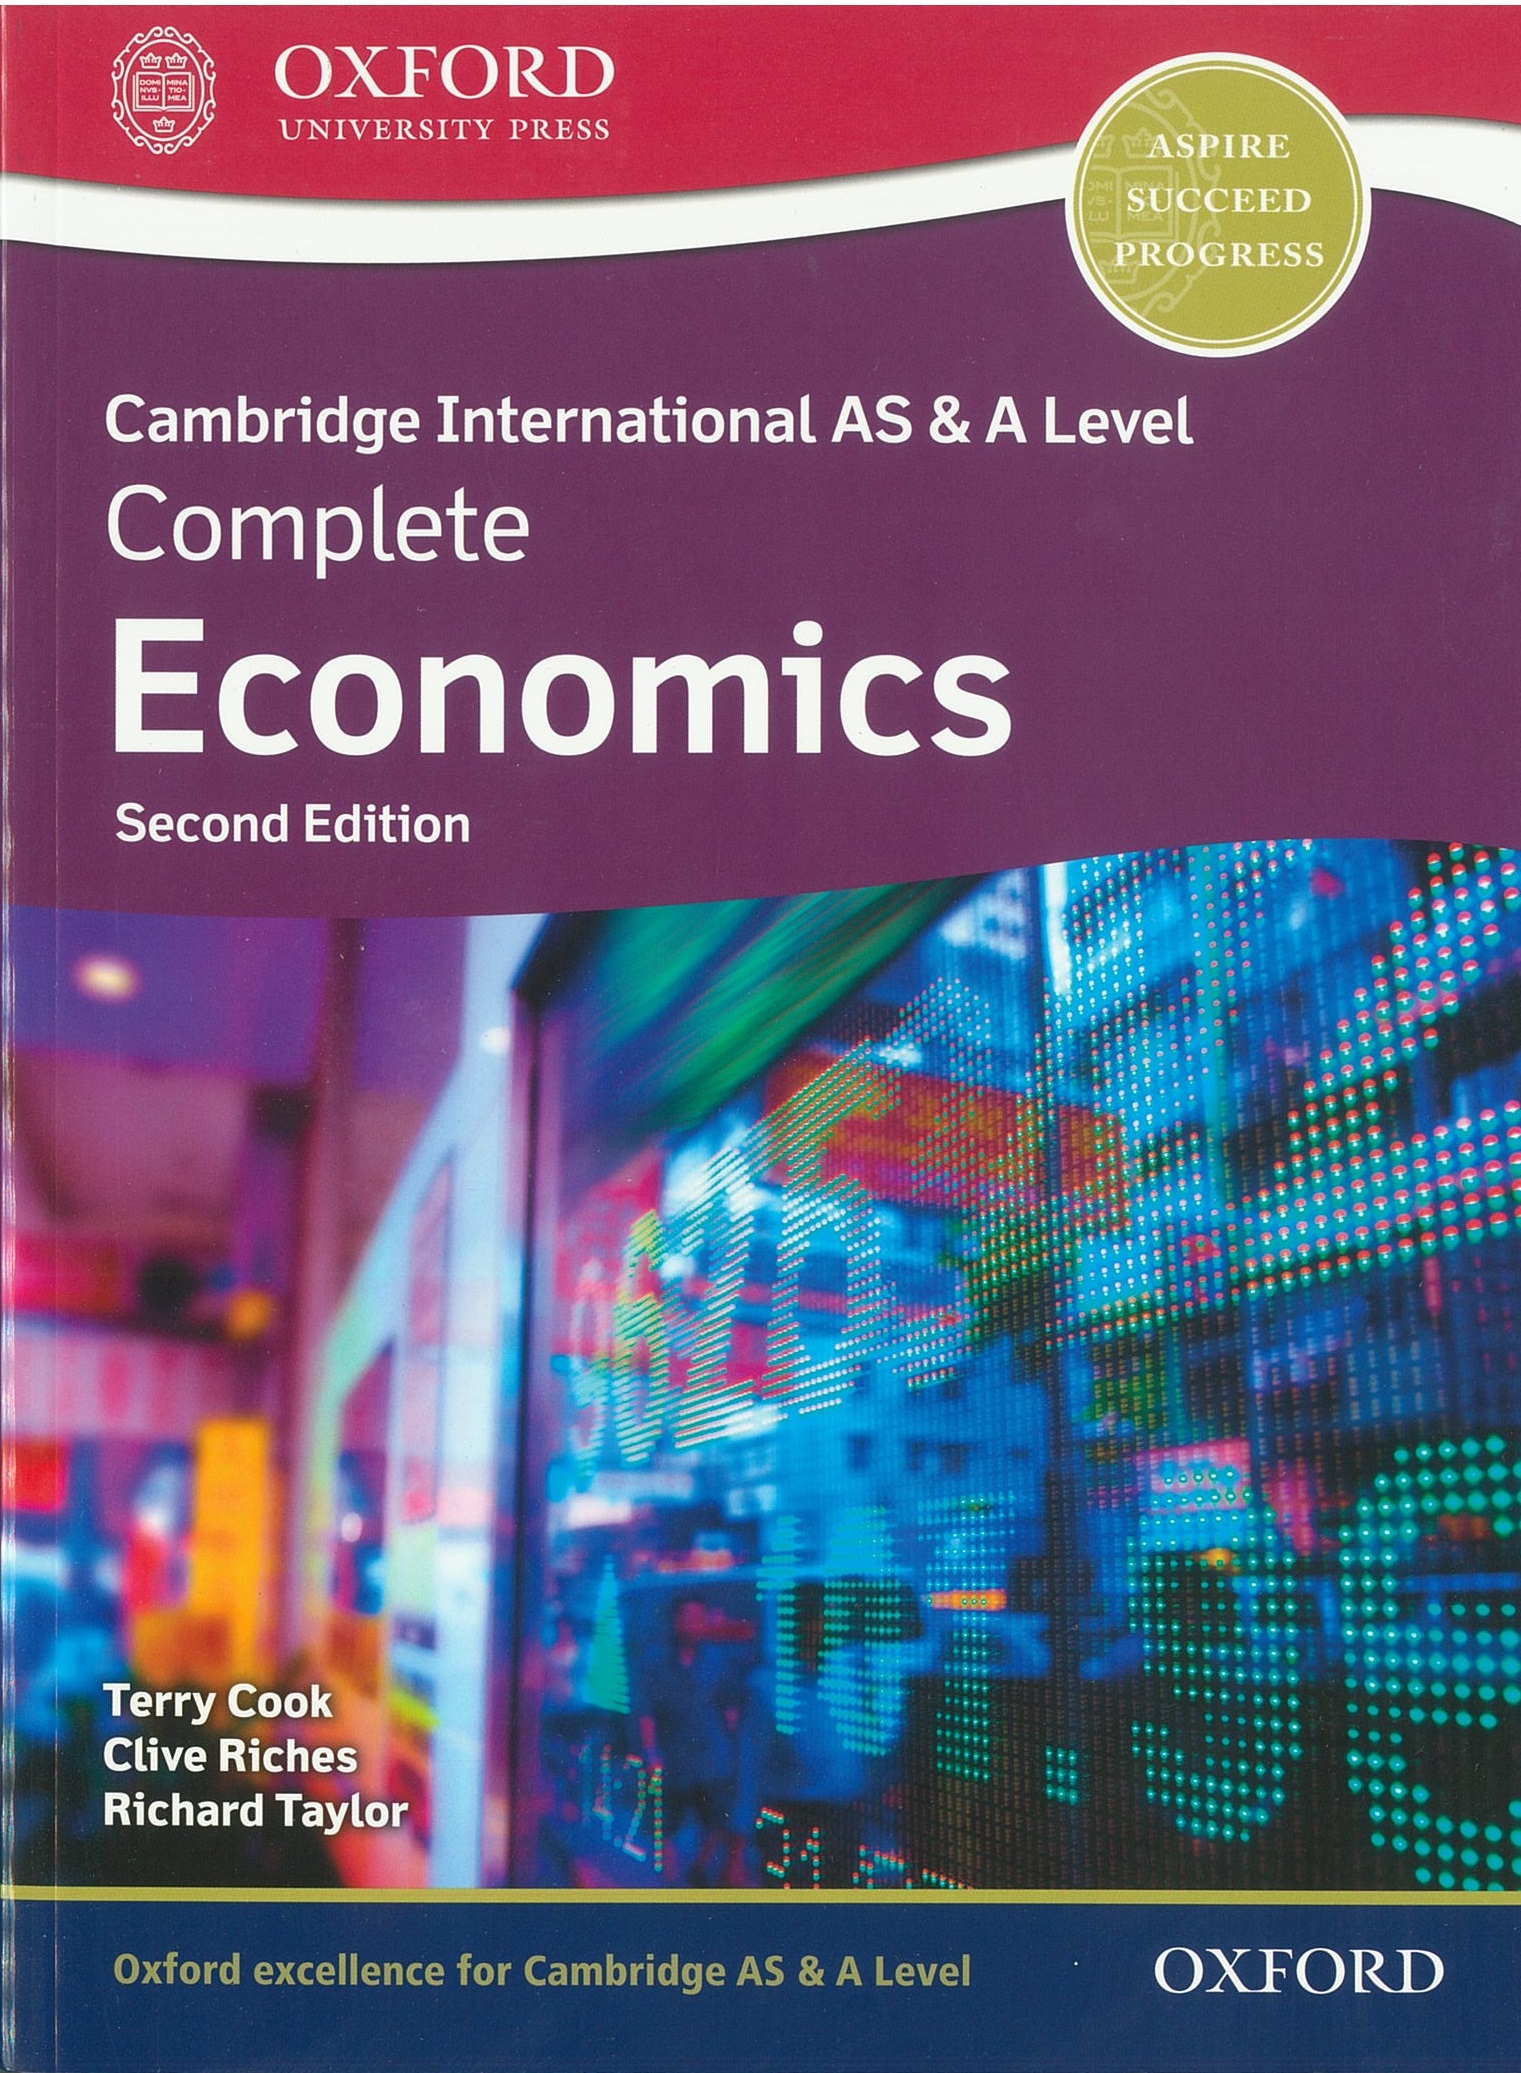 OUP - AS & A LEVEL COMPLETE ECONOMICS -STUDENT BOOK 2ED.